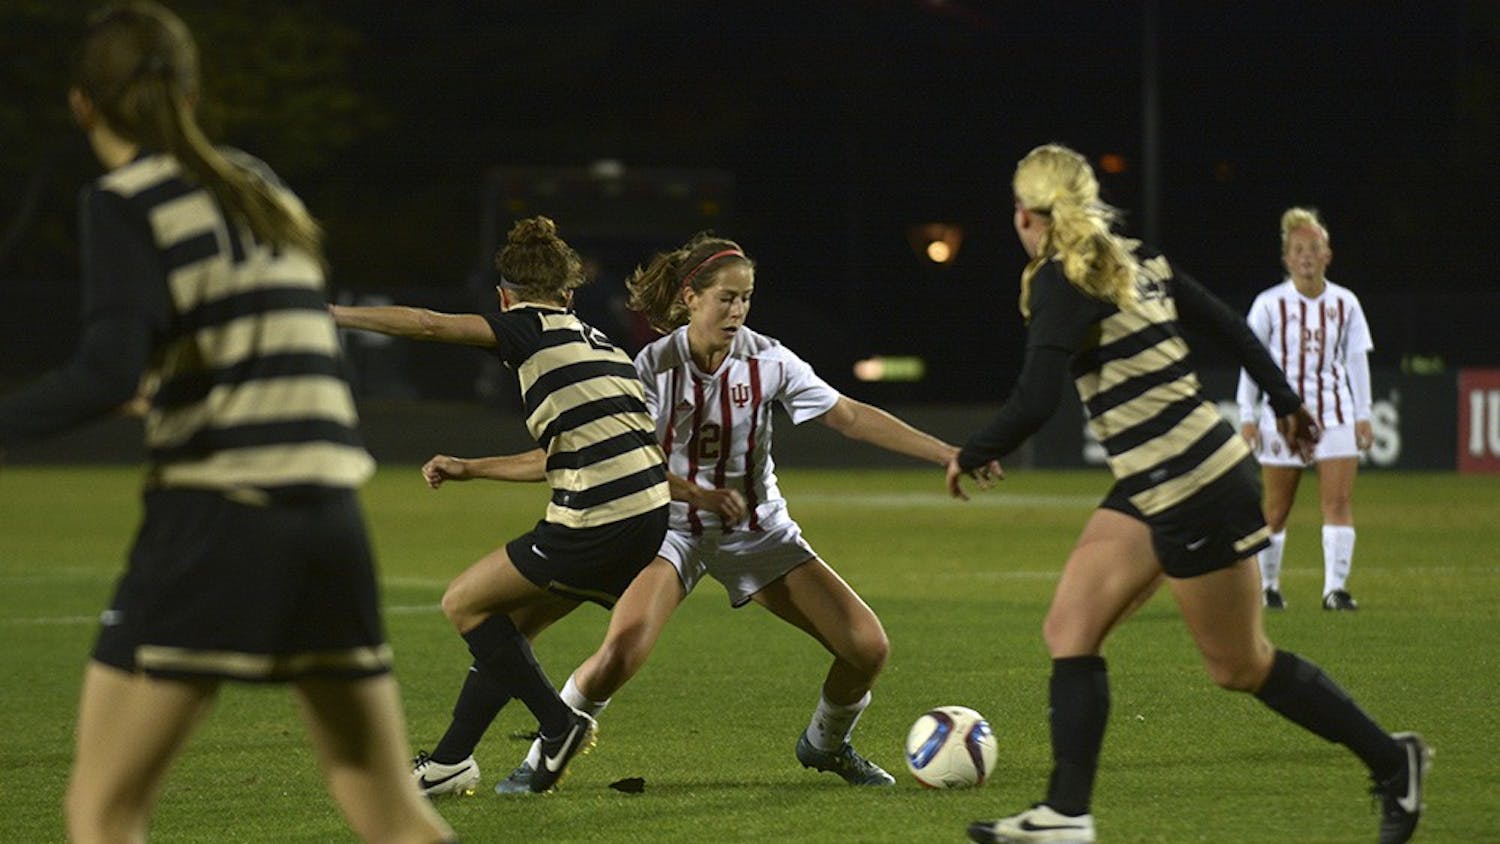 Senior Jessie Bujouves works her way through Purdue University's defense on Wednesday night. IU lost the game 2-0.